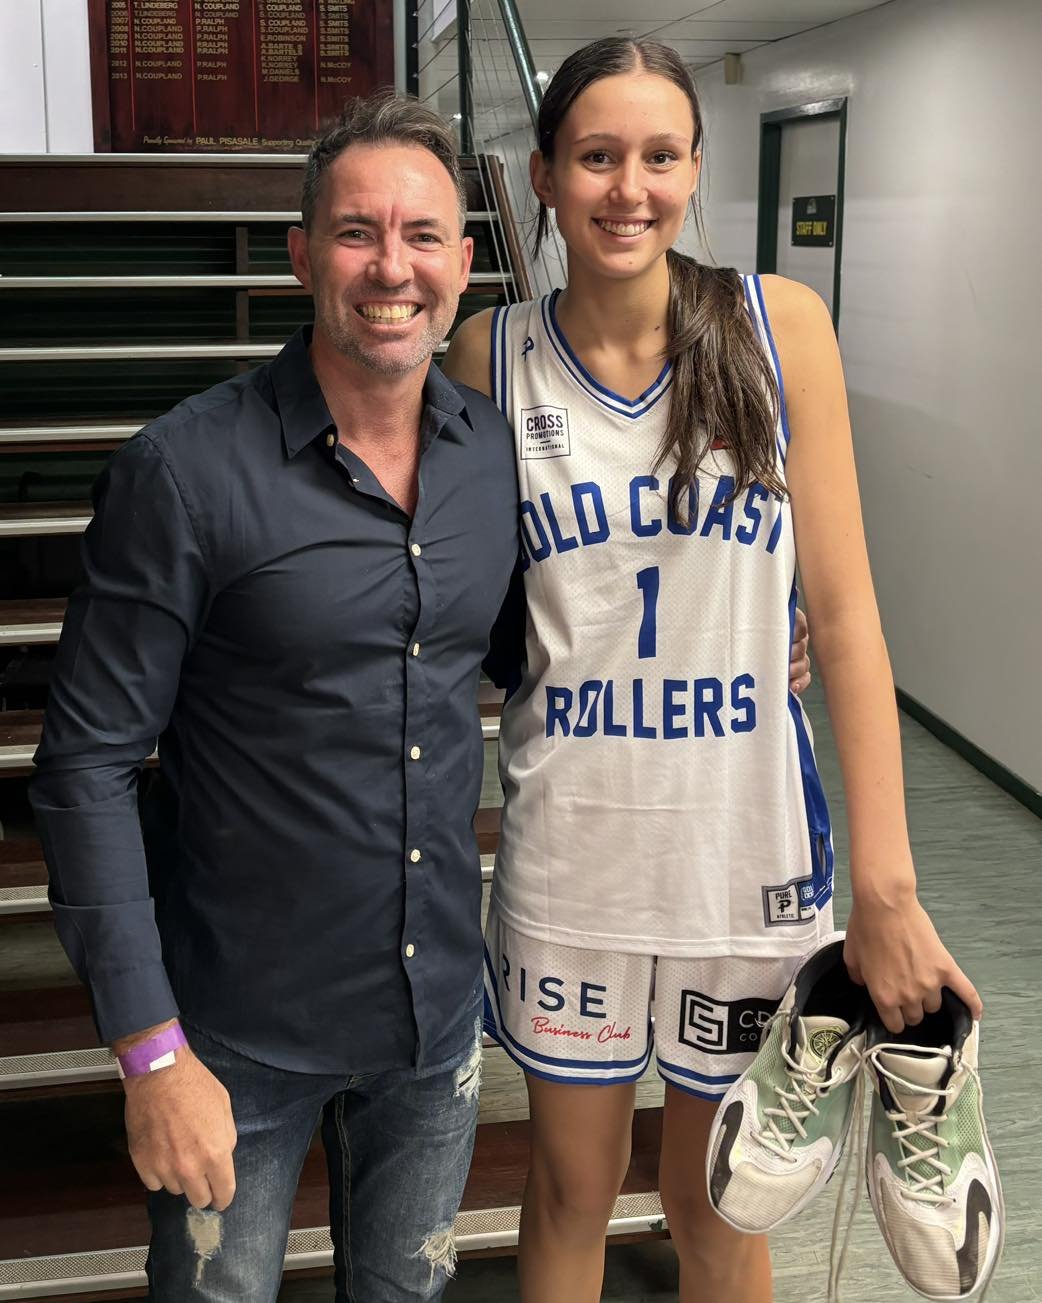 Vipers player MIA BITZIOS makes her NBL1 debut 🤩

Vipers Open Girls player Mia Bitzios is the first ever female Varsity Vipers player to play in the NBL1 competition!
Mia made her NBL1 debut for the Gold Coast Rollers last night in a huge win over t